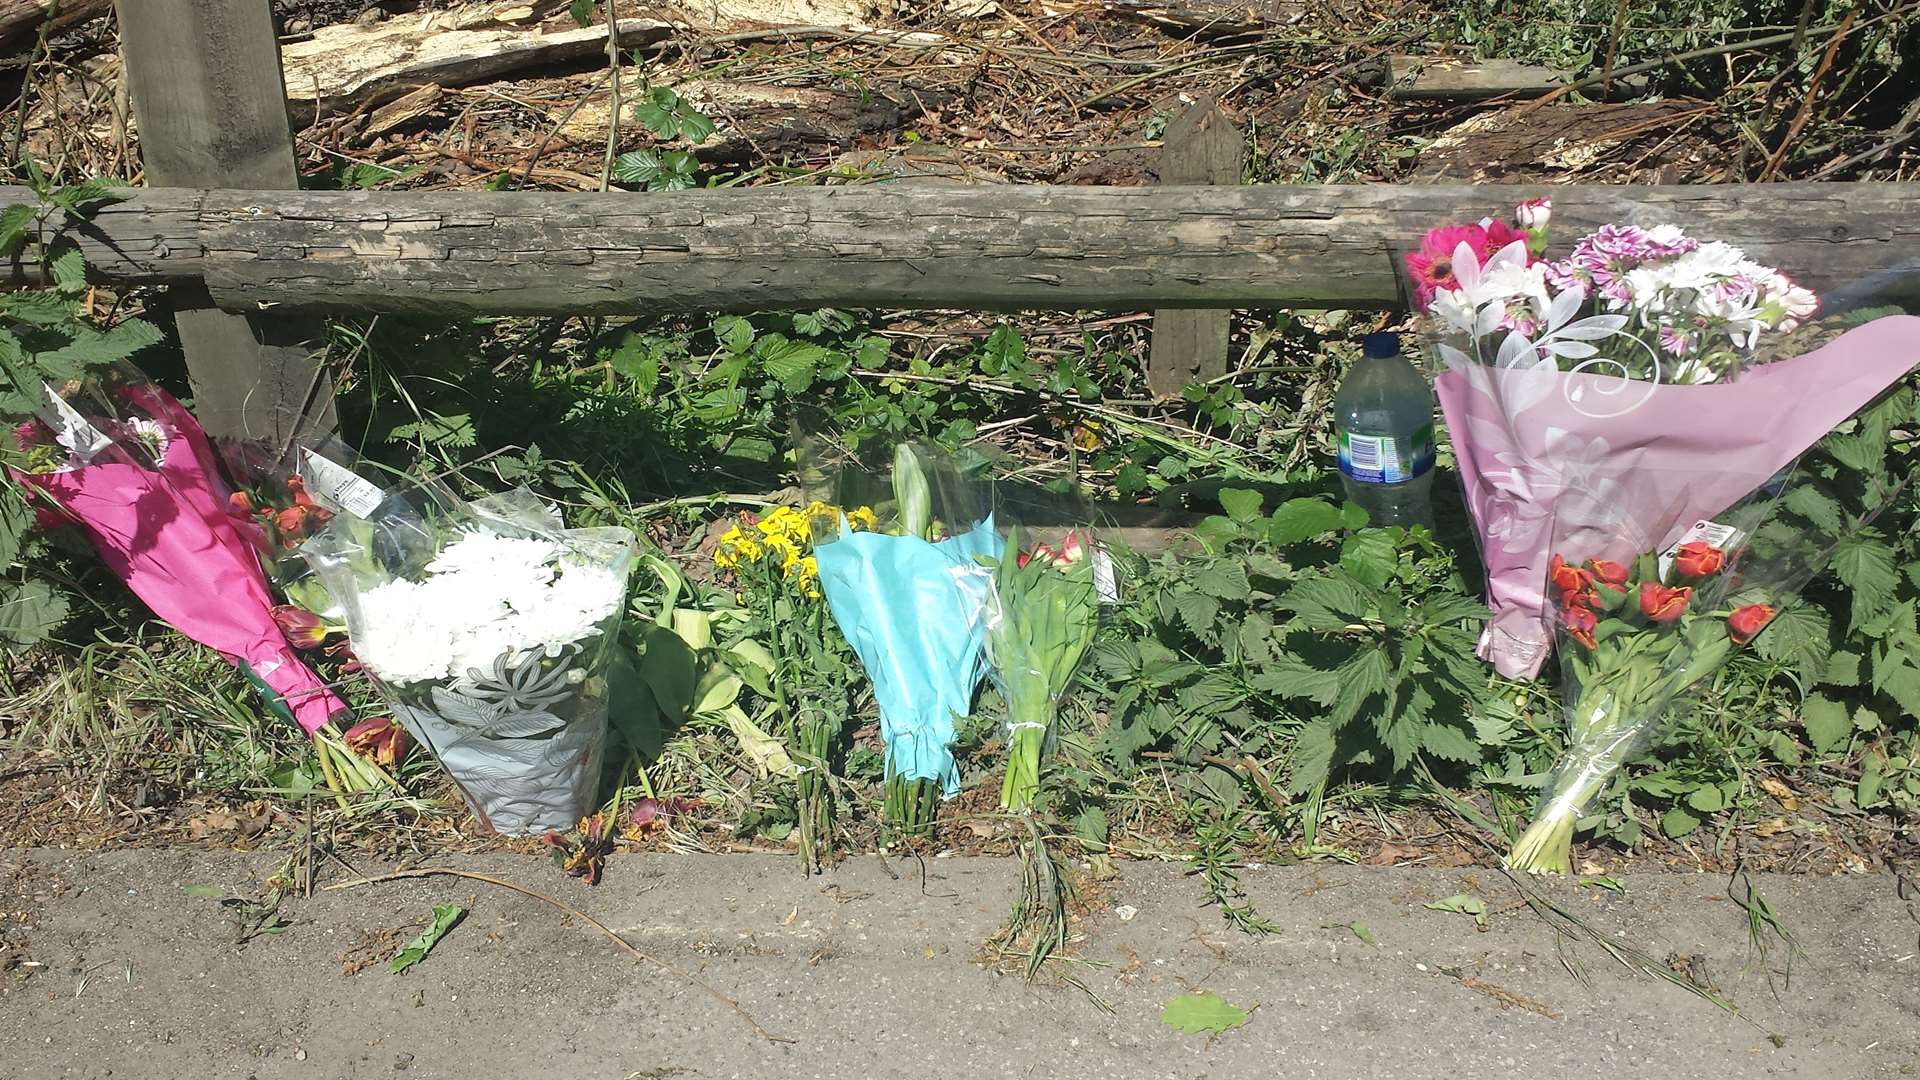 Flowers at the scene of fatal crash